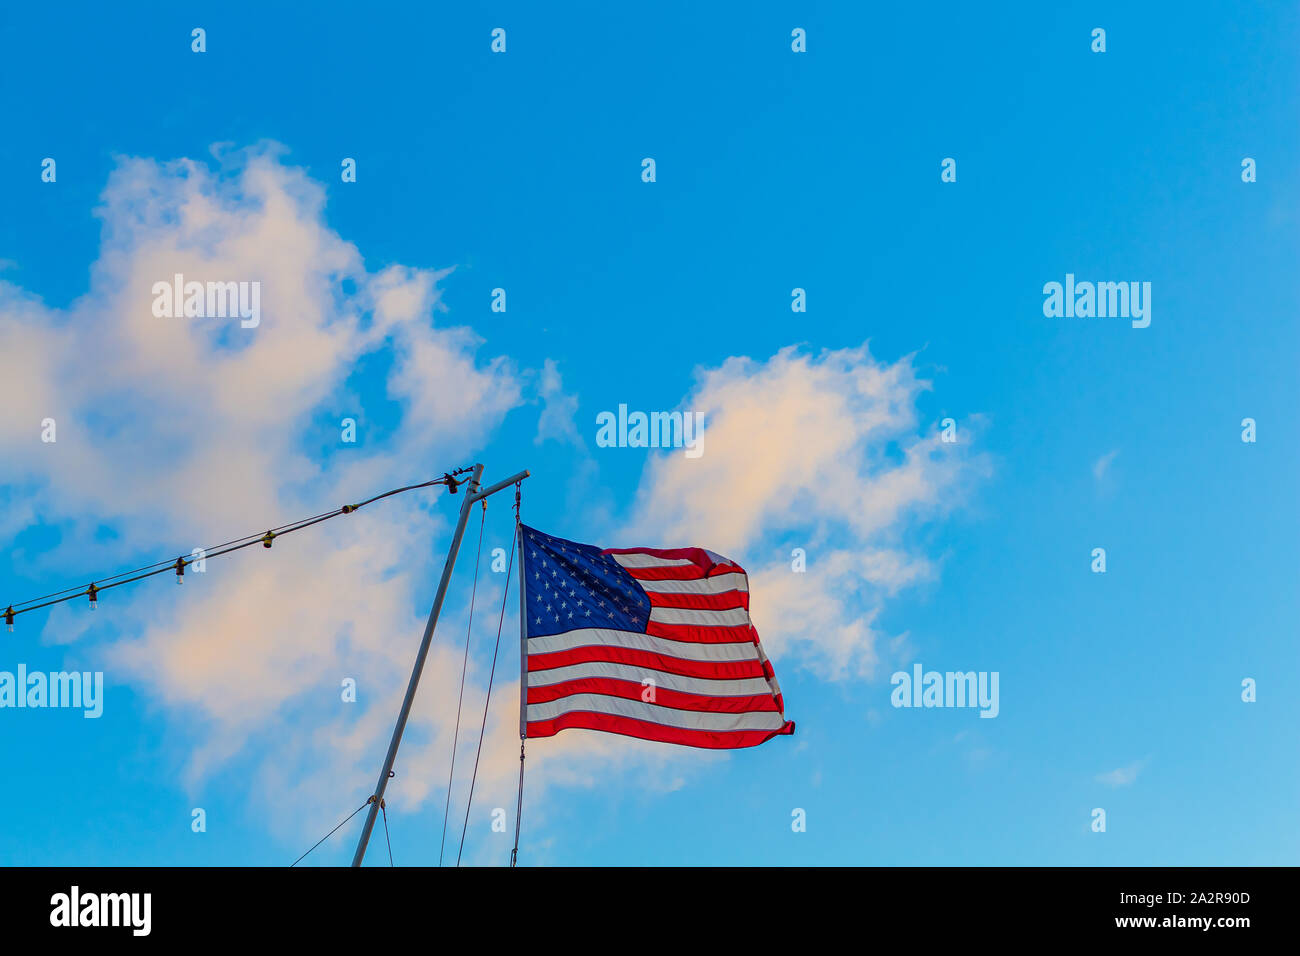 An American ensign blows in the wind as it hangs from a gaff at the stern of a boat. The flag flies against a blue sky with white clouds. Stock Photo